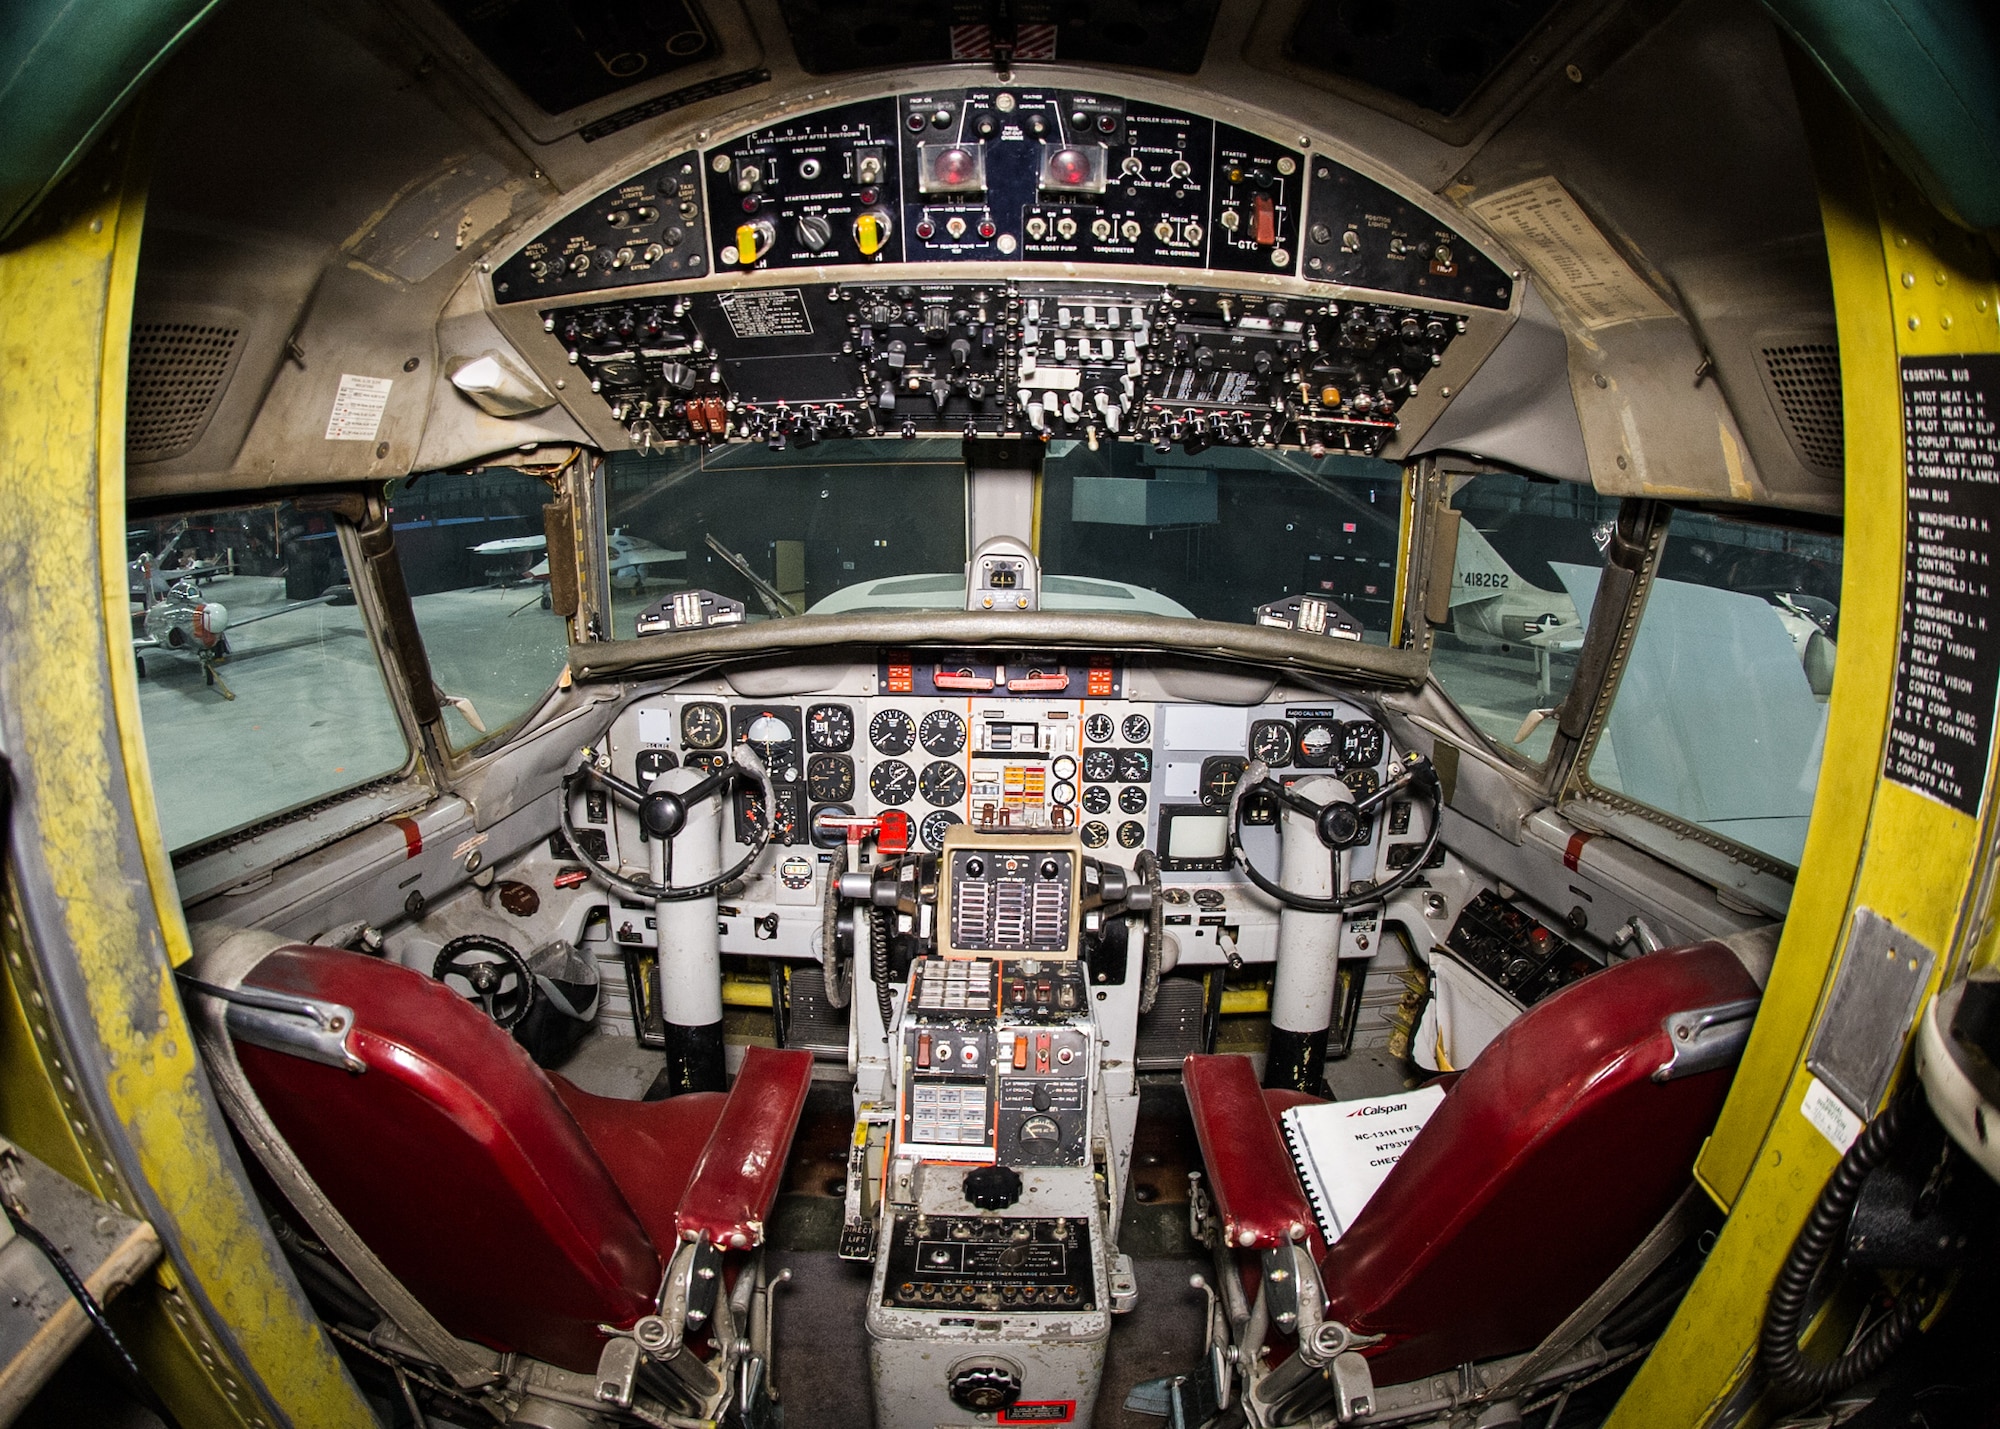 DAYTON, Ohio -- Convair NC-131H Total In-Flight Simulator (TIFS) cockpit view in the Research & Development Gallery at the National Museum of the United States Air Force. (U.S. Air Force photo by Ken LaRock)
